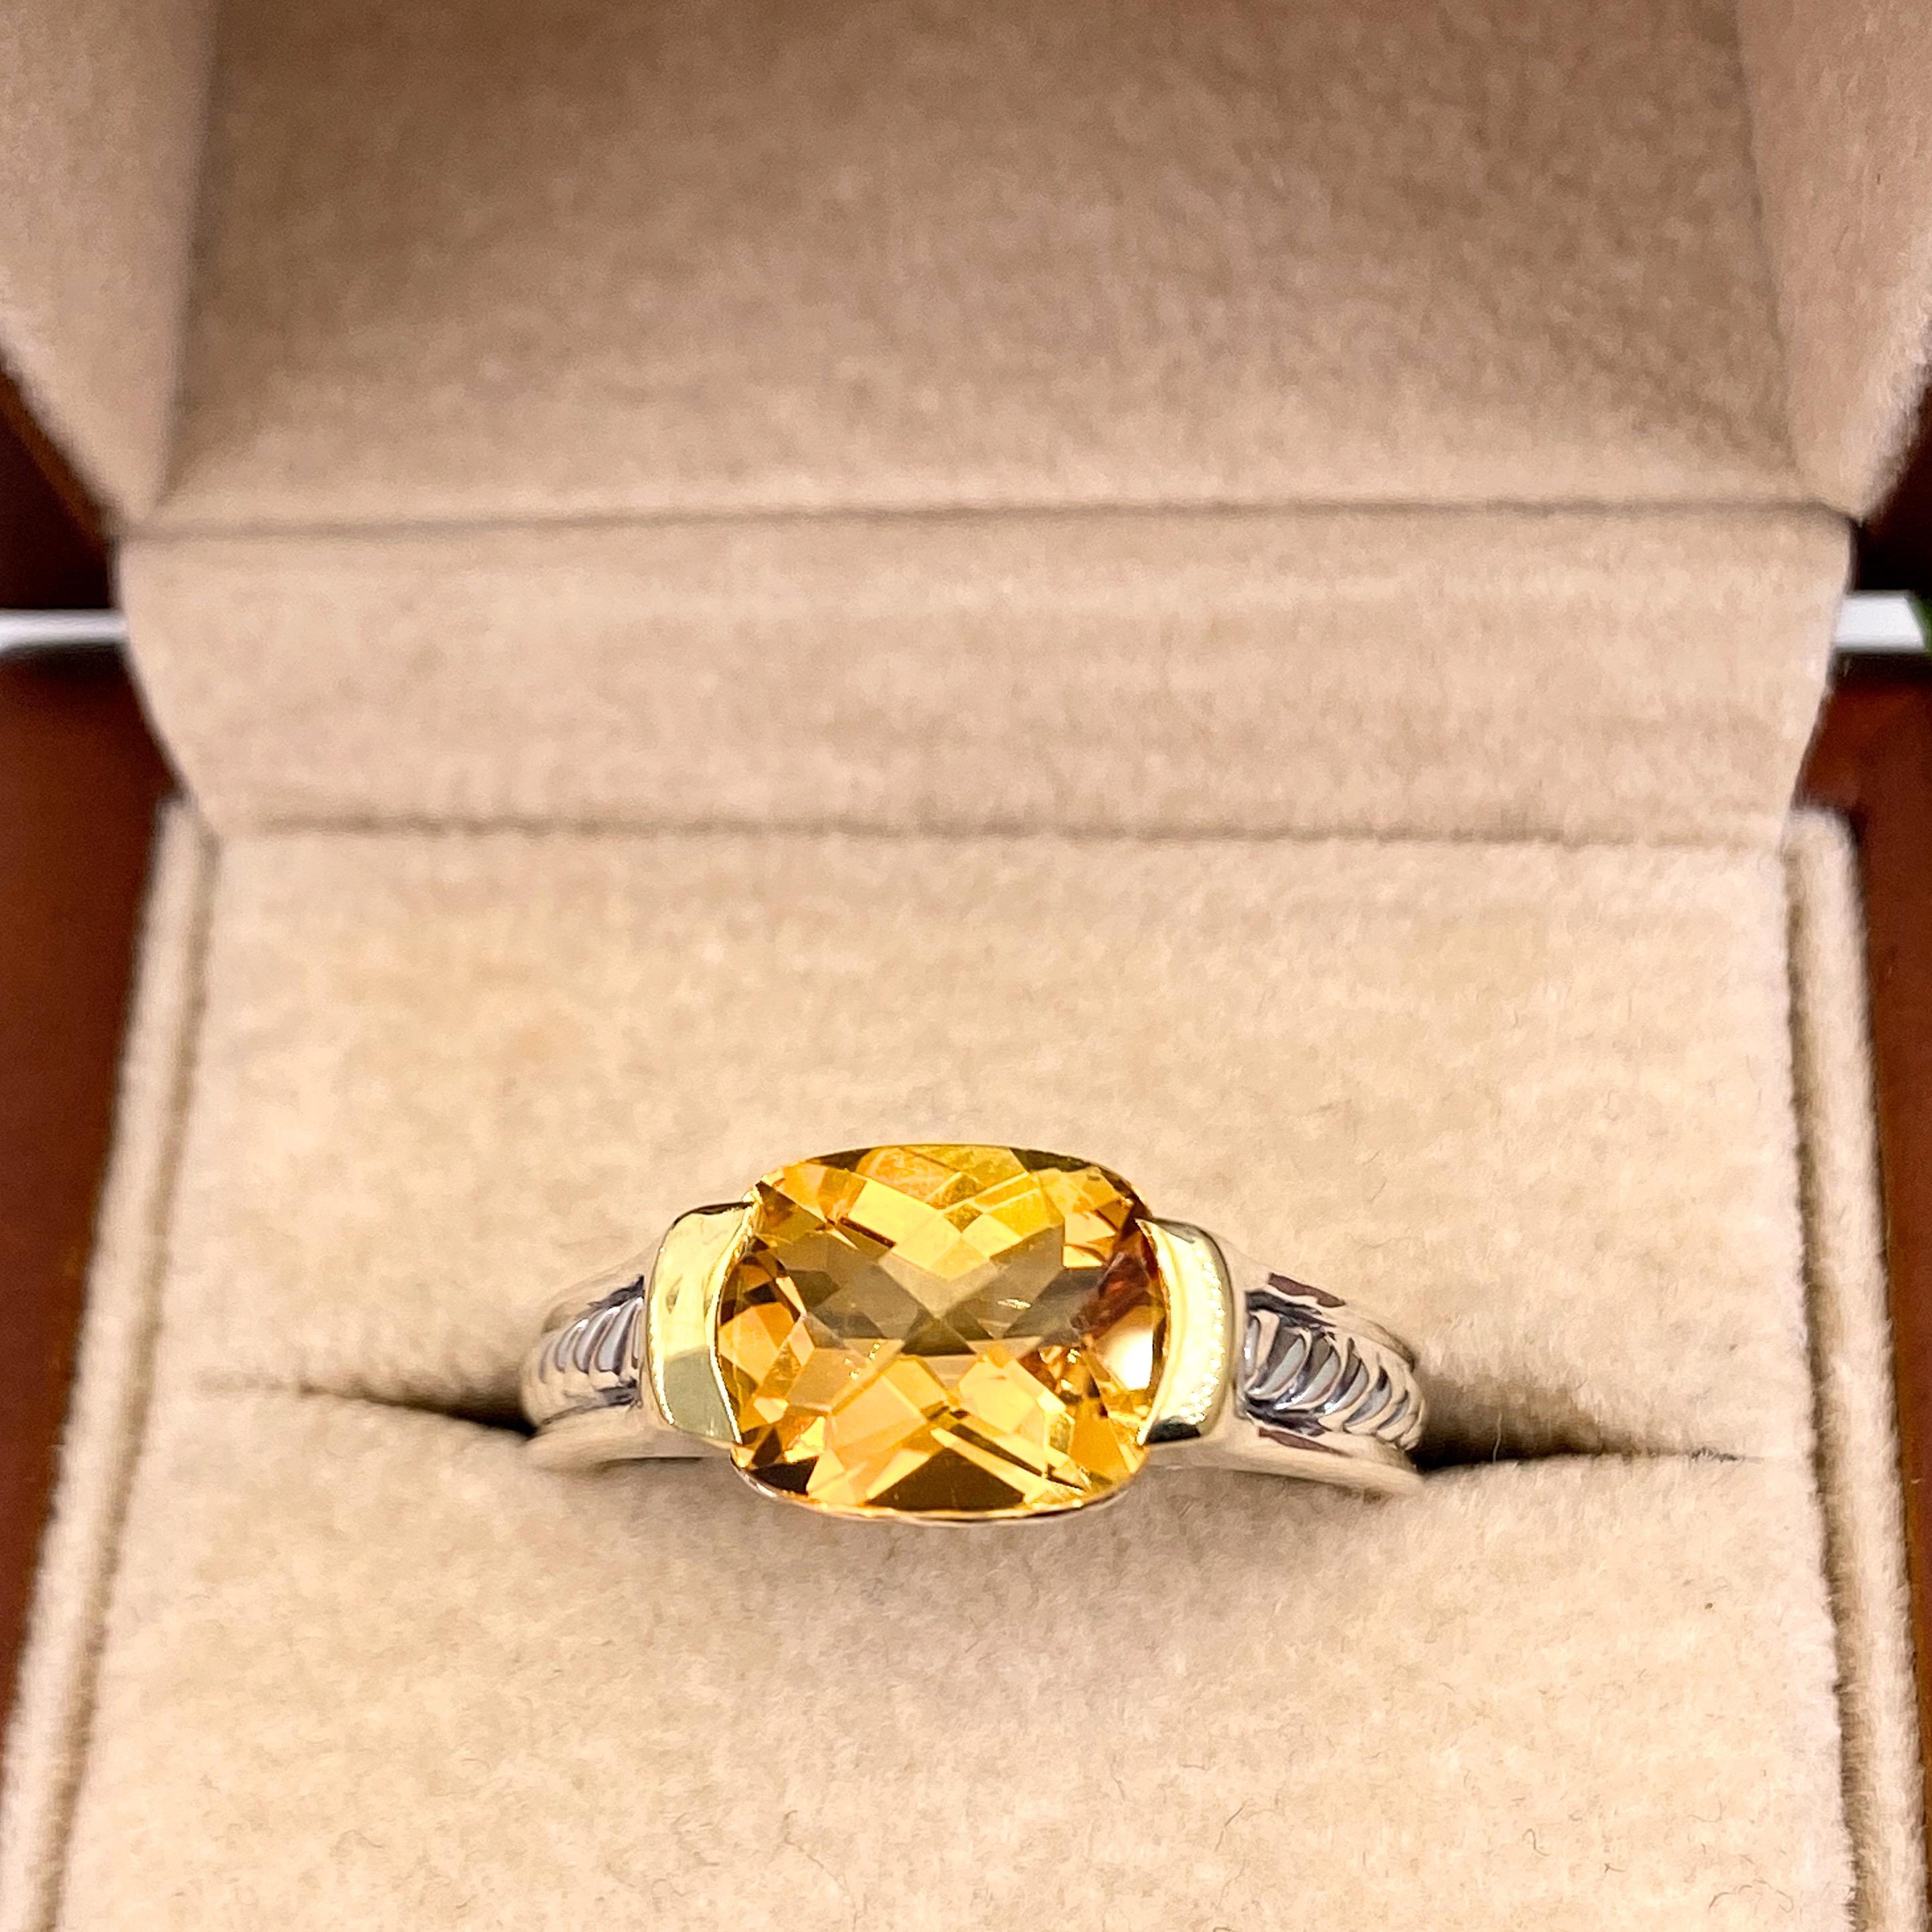 David Yurman Faceted Citrine Ring 18 Karat Yellow Gold and Sterling Silver 1